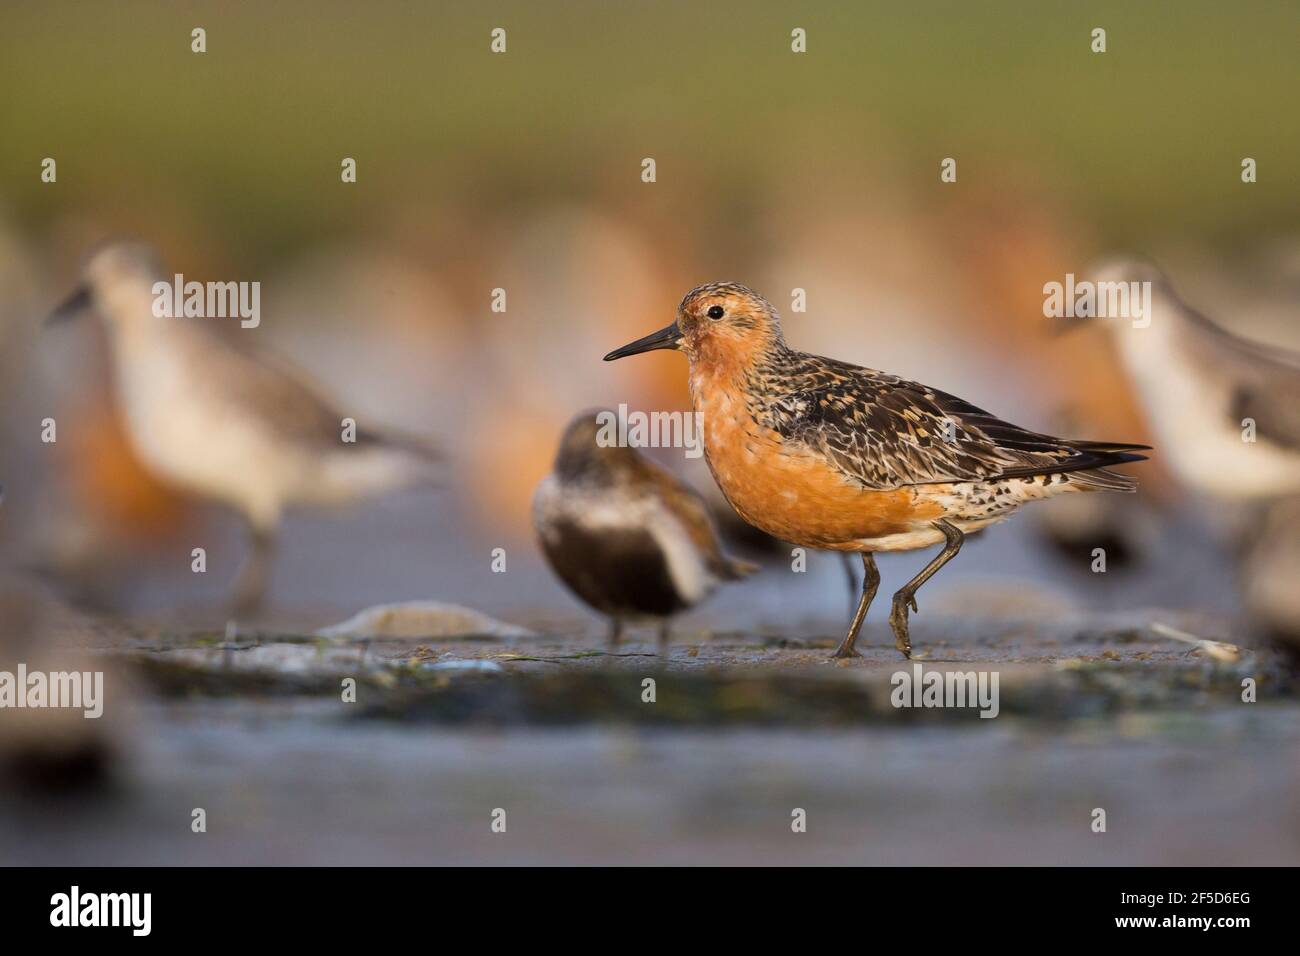 red knot (Calidris canutus), Adult in breeding plumage standing on mud flat at a high tide wader roost with several Dunlins, Germany Stock Photo